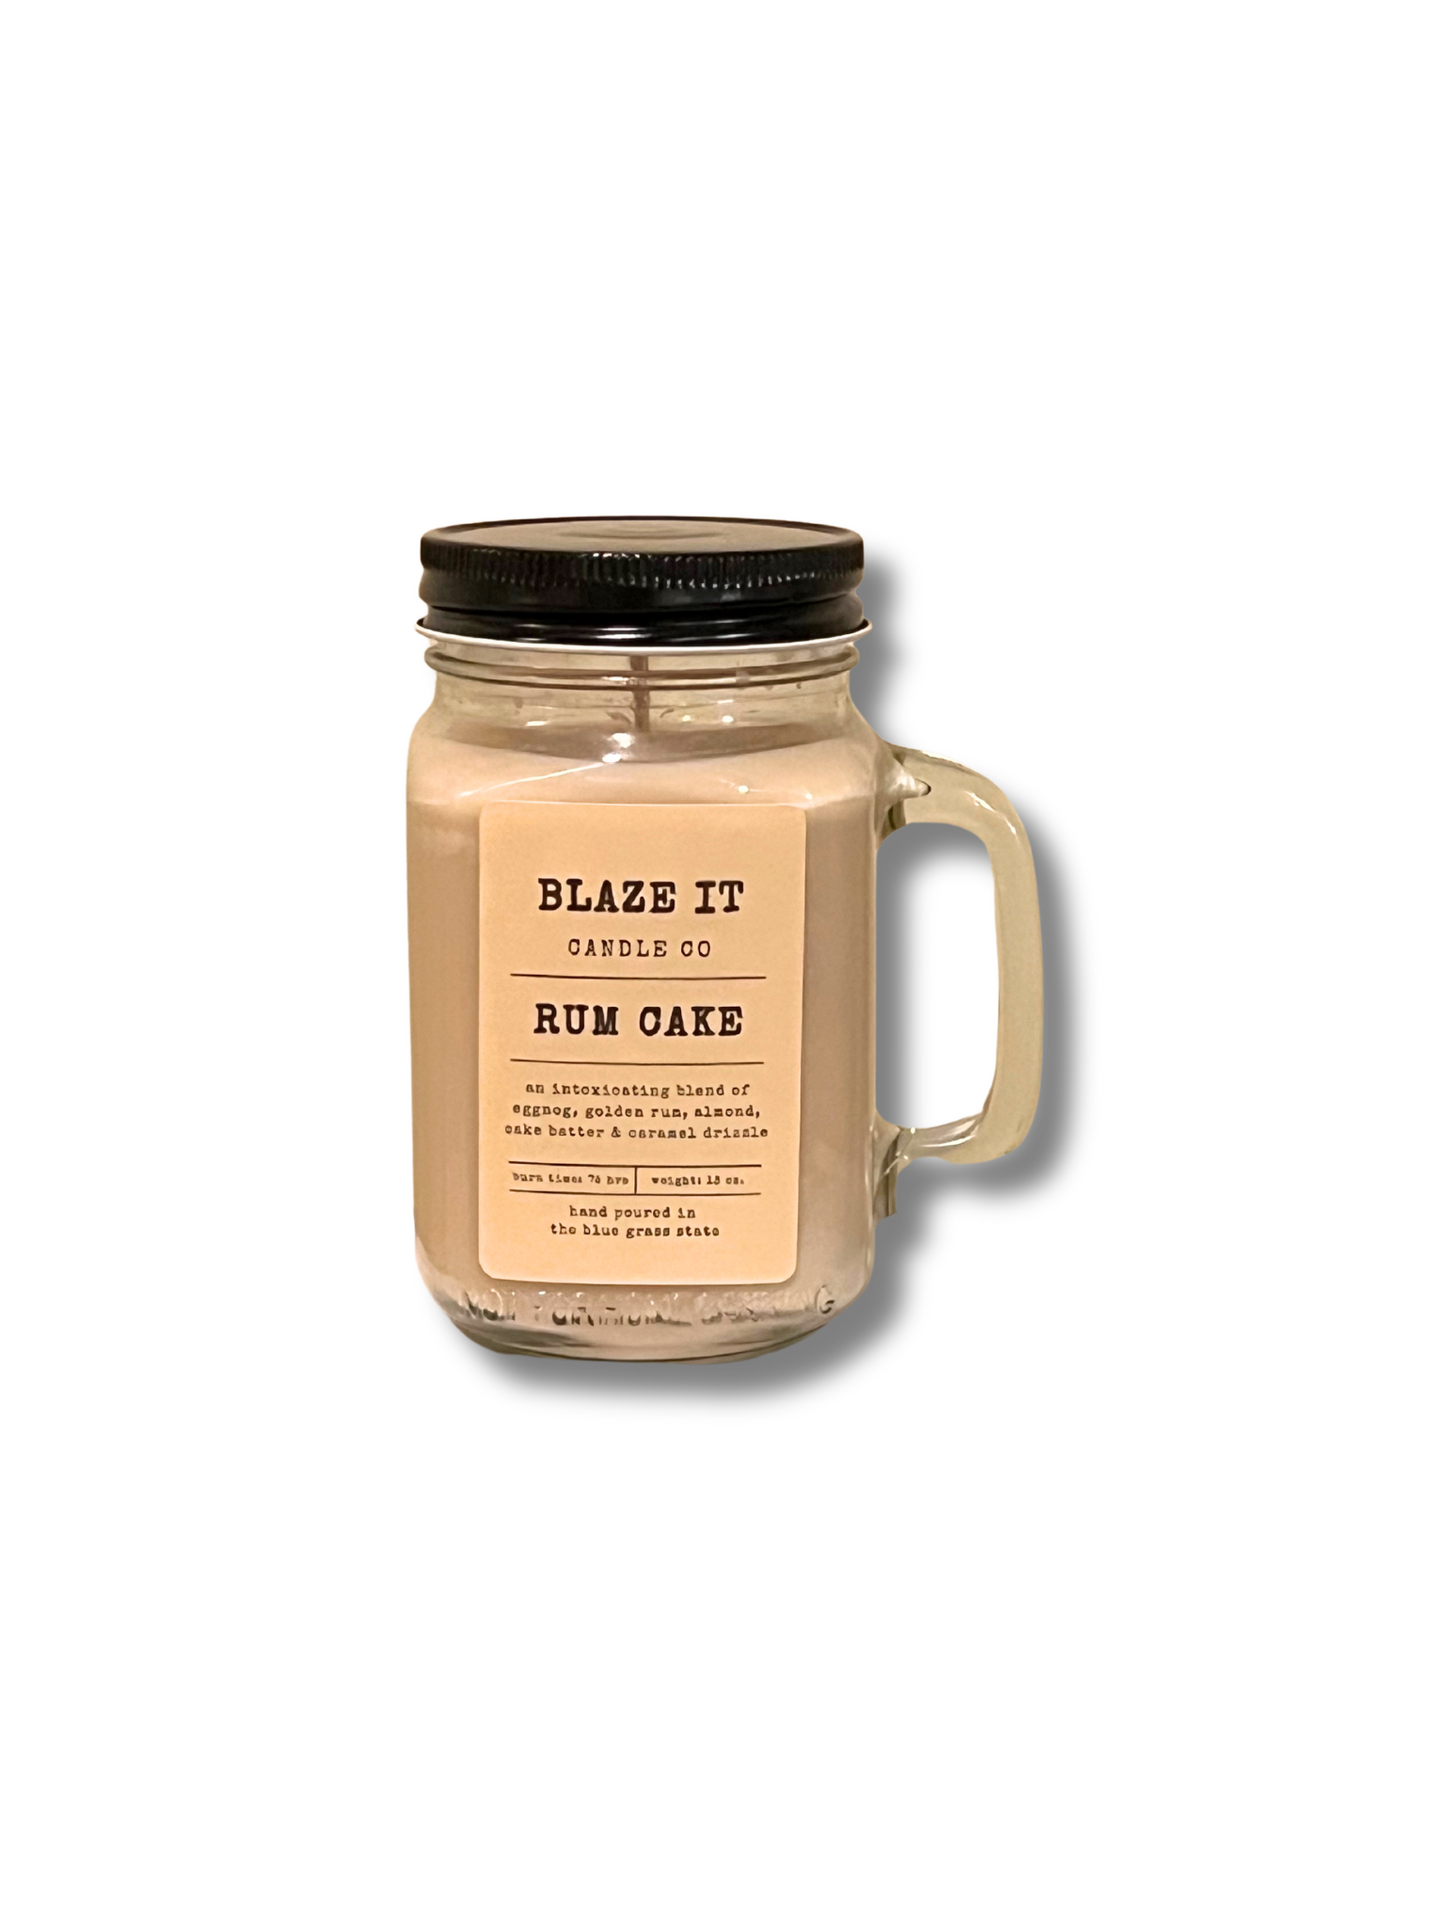 Rum Cake candle - Blaze It Candle Co